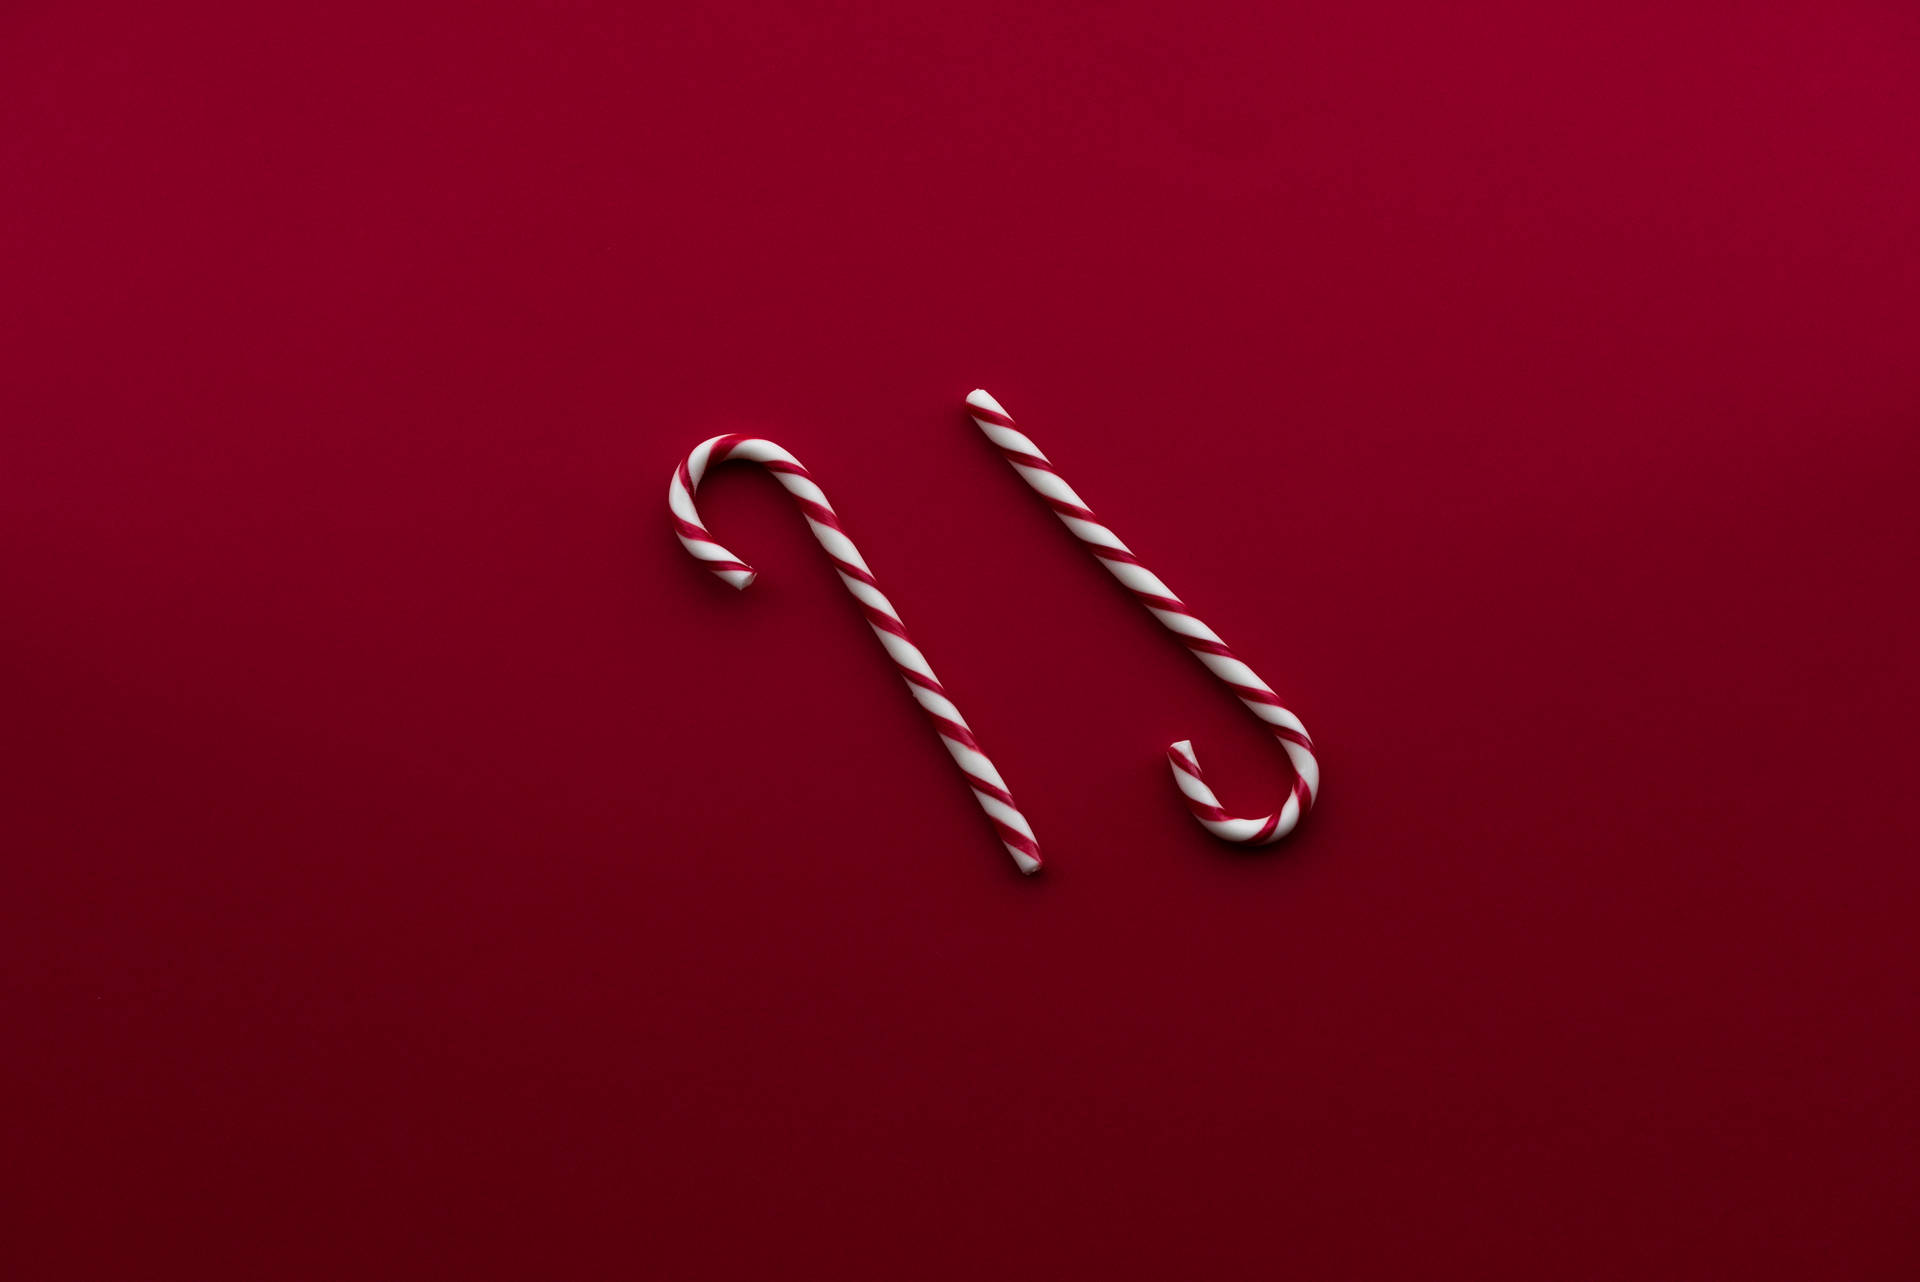 Candy Cane 6016X4016 Wallpaper and Background Image